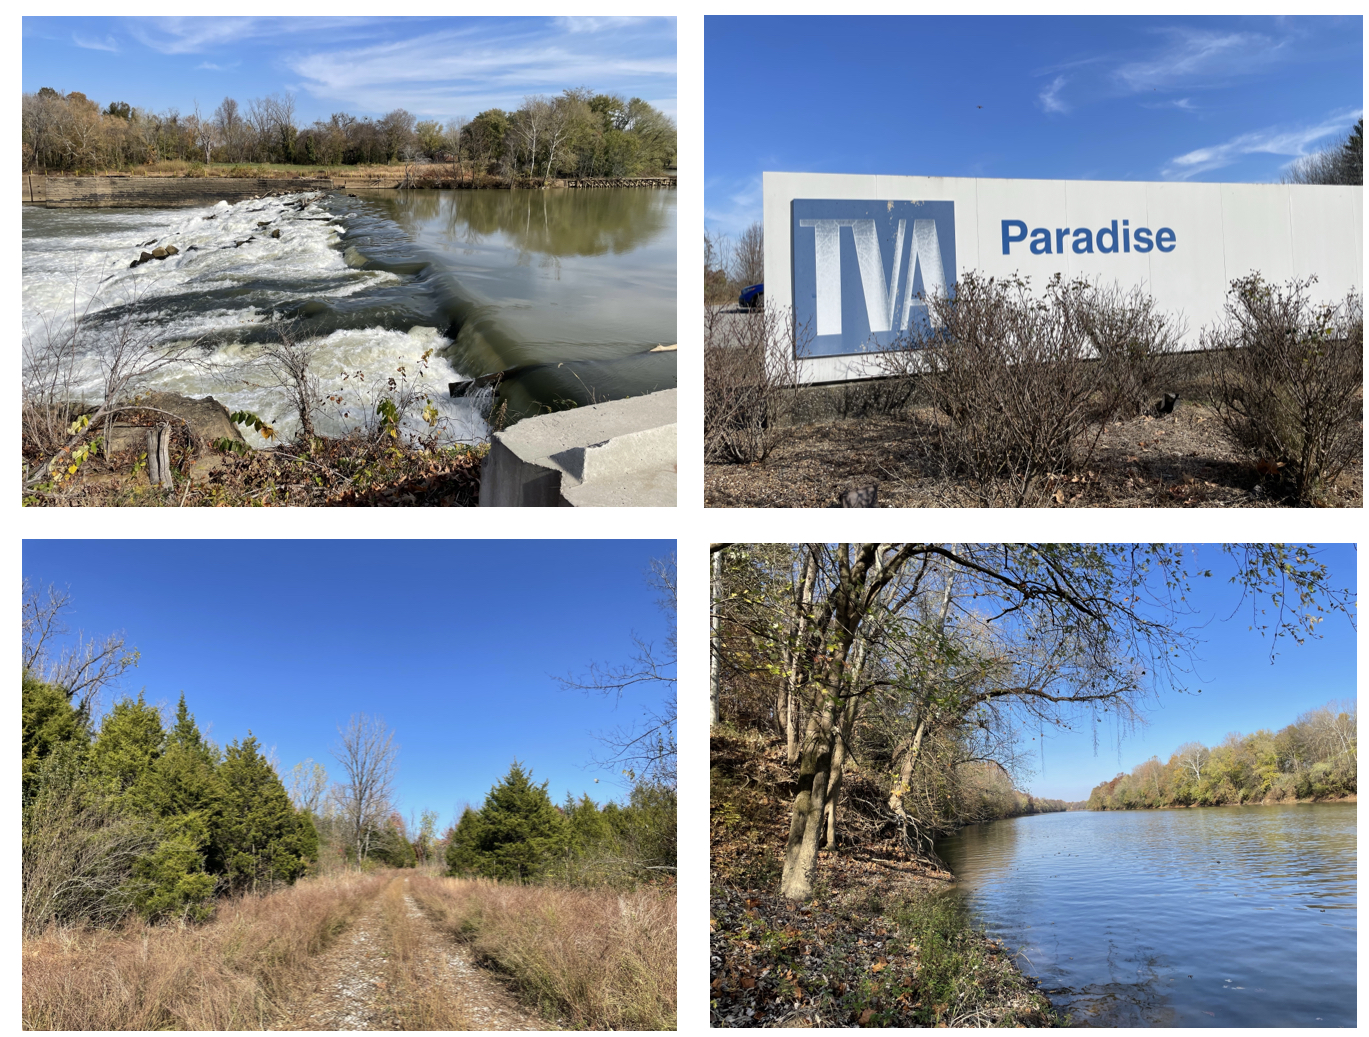 Photos from Paradise, Kentucky.  Photos taken by and the property of FourWalls.